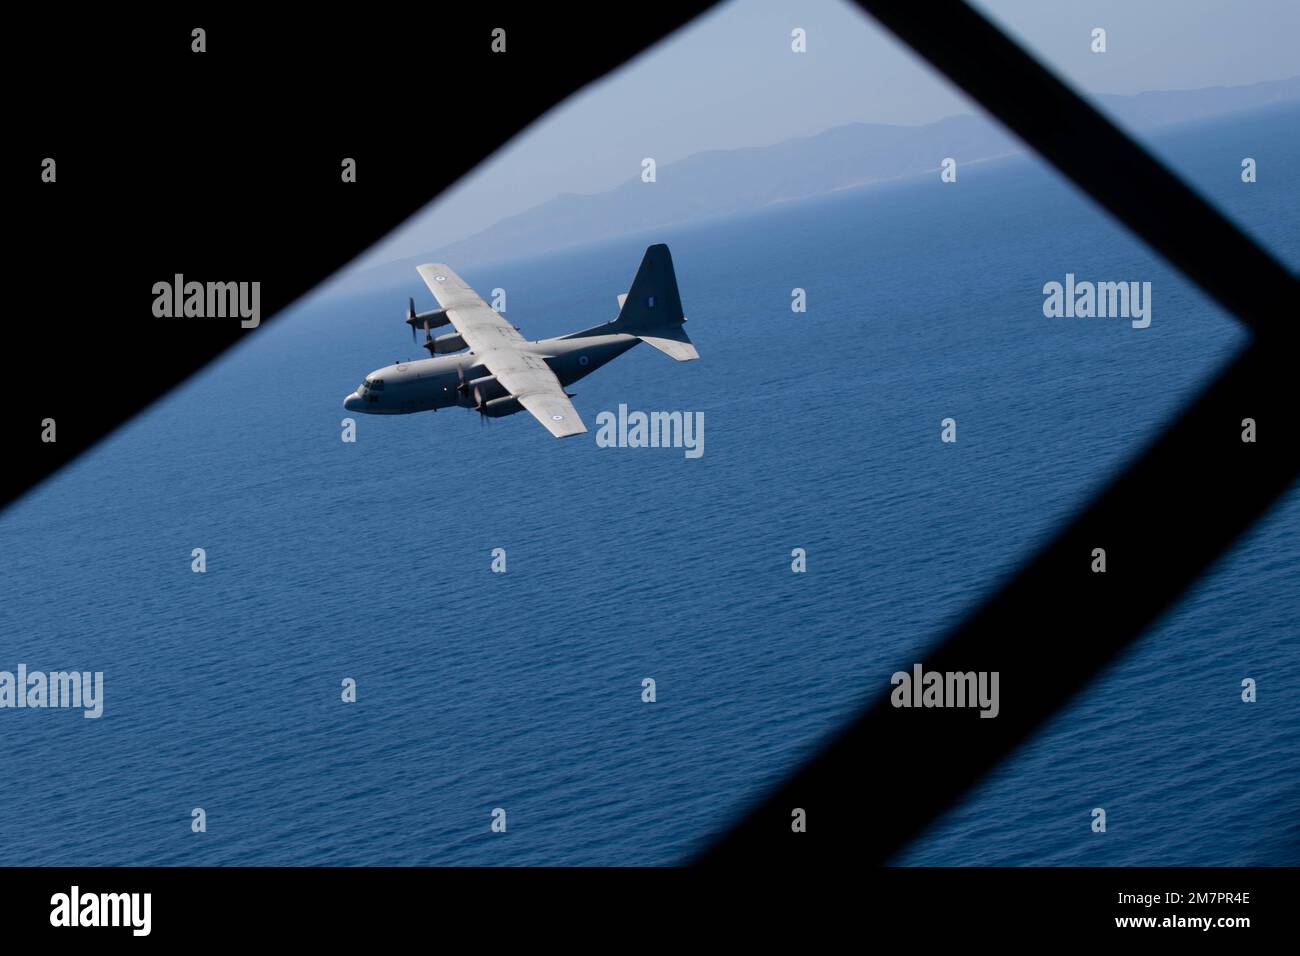 A Hellenic air force aircraft flies in formation with  U.S. Air Force C-130J Super Hercules aircraft during Exercise Stolen Cerberus IX over Athens, Greece, May 11, 2022. The bilateral training included low-level defensive flying maneuvers, cargo air-drops, combat offloads for cargo pallets, attempted mid-flight interception simulations and emergency medical evacuations. Stock Photo